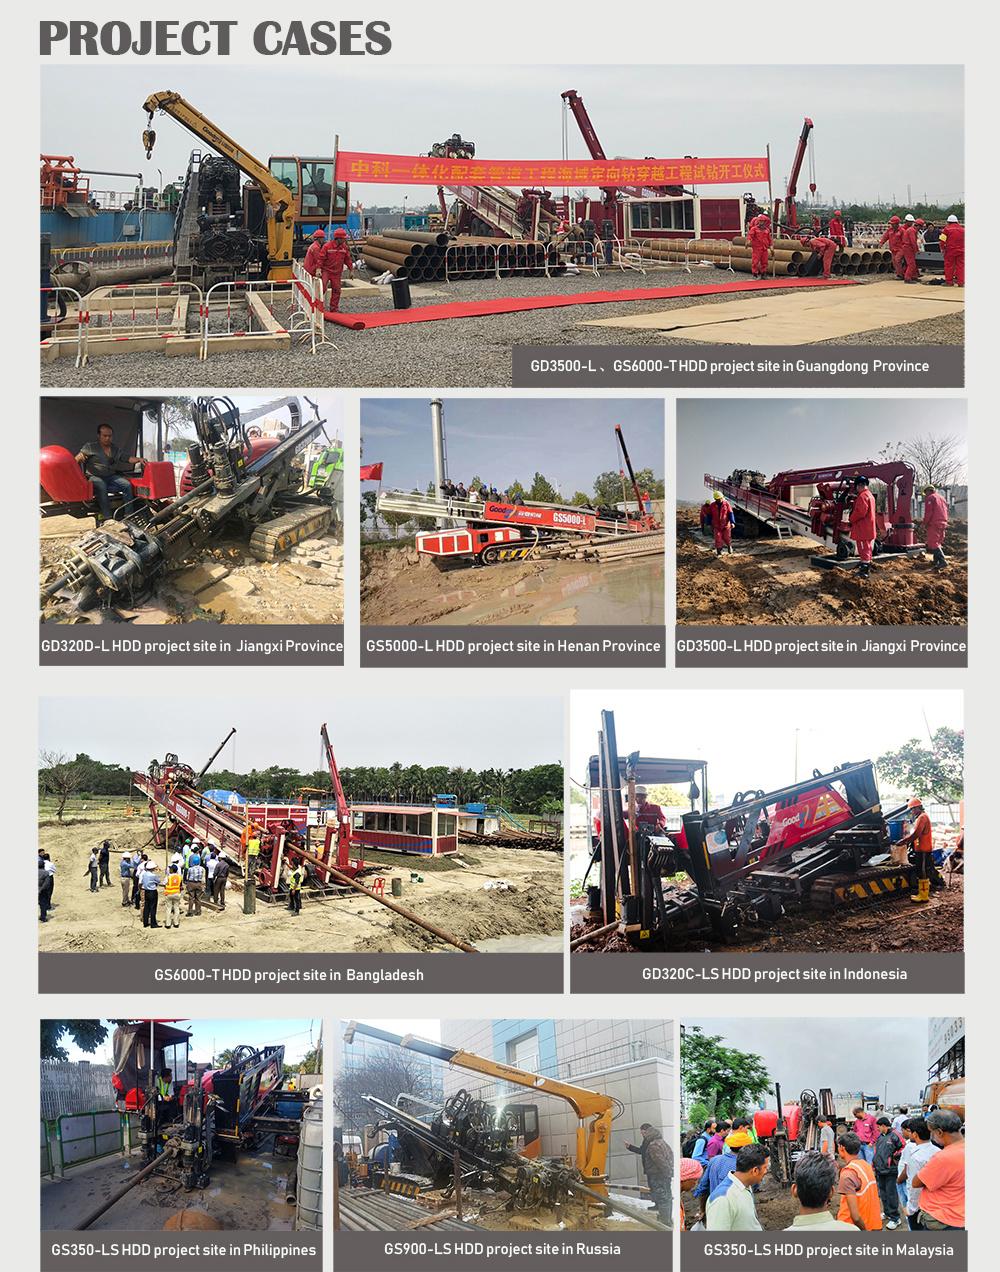 Goodeng 5 ton pipeline crossing machine horizontal directional drilling machine for optical fiber/cable/oil/gas system